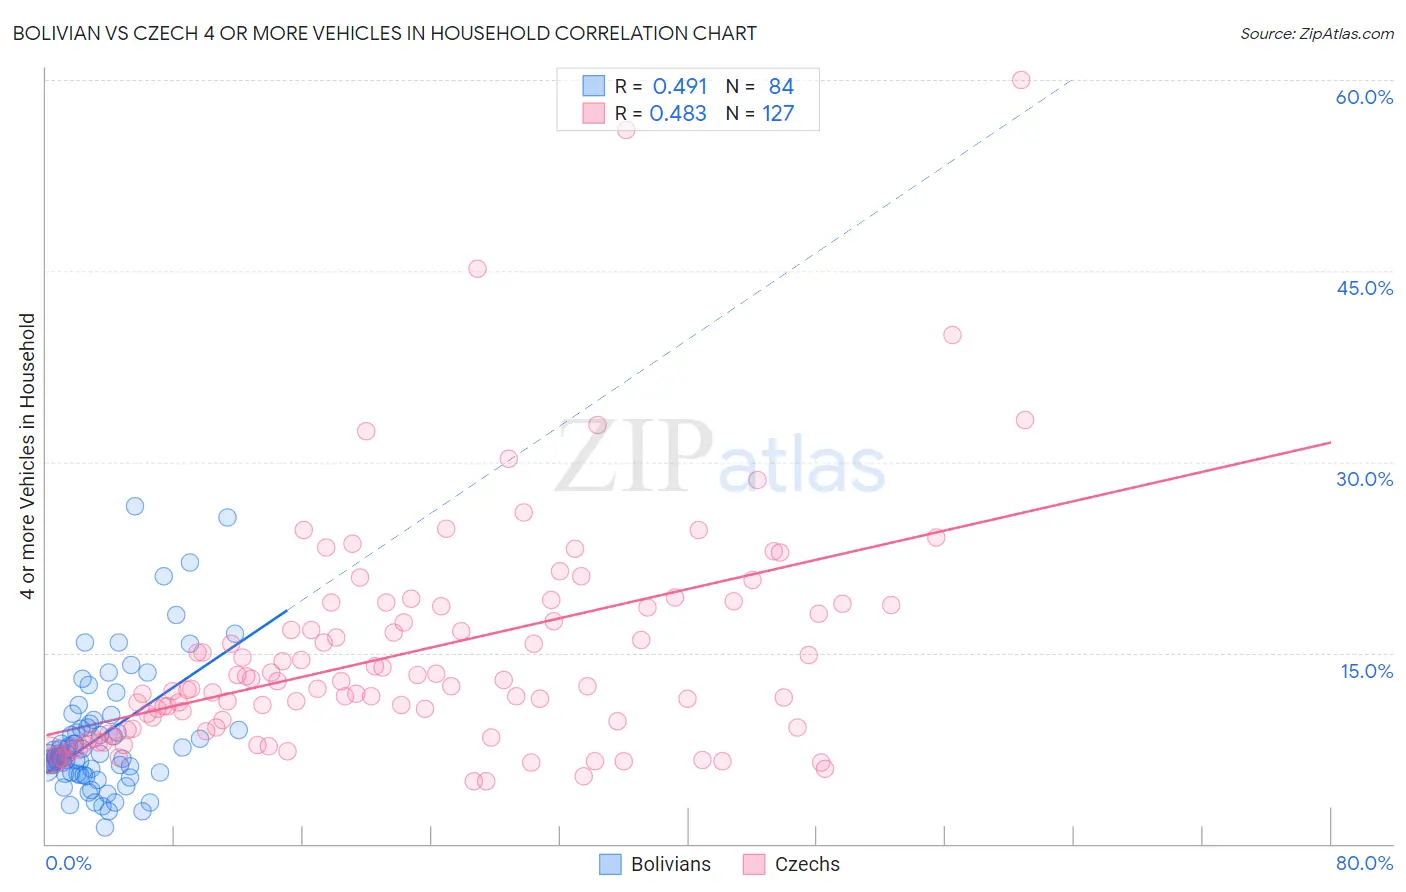 Bolivian vs Czech 4 or more Vehicles in Household